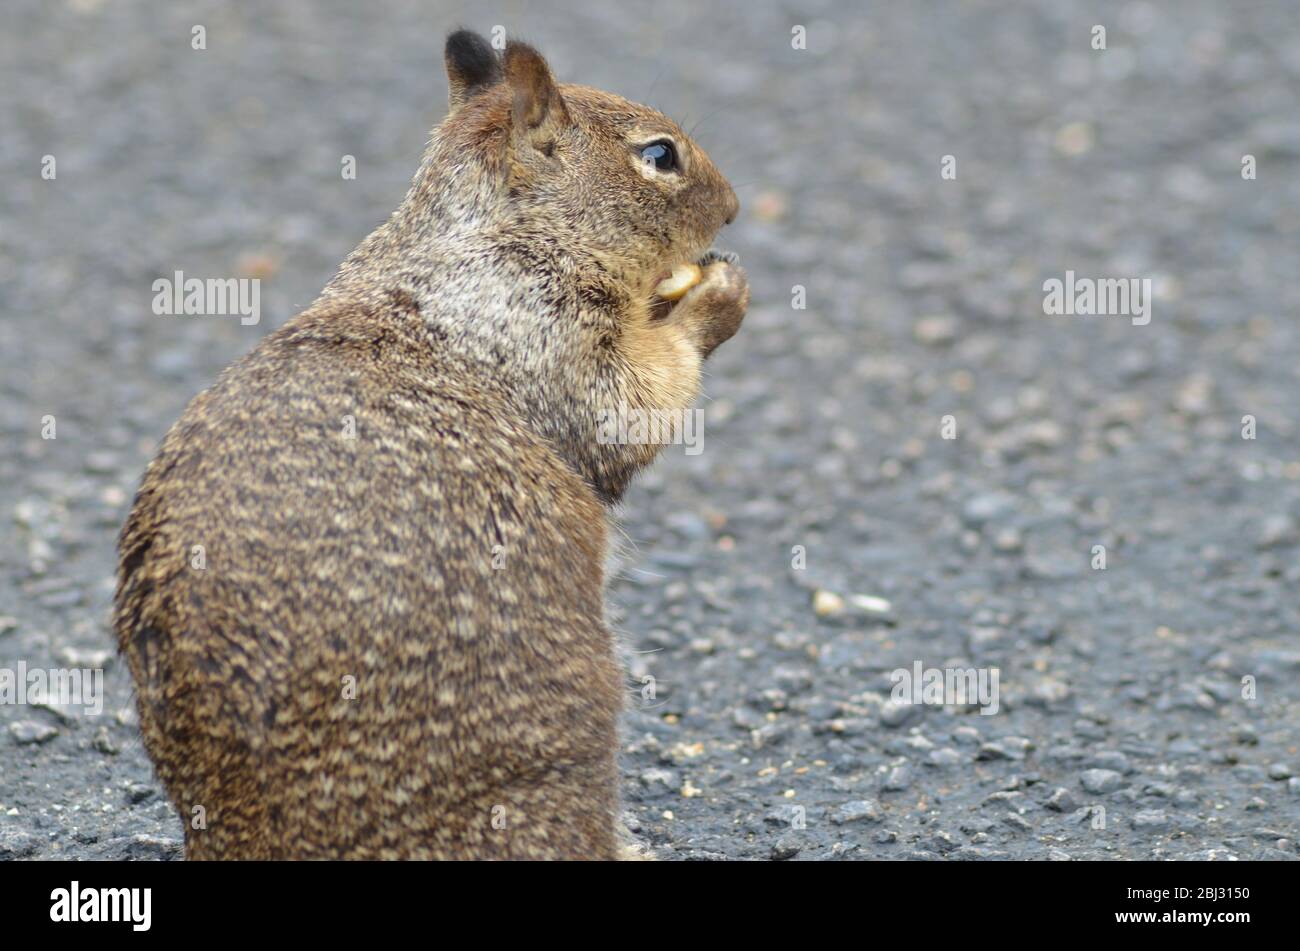 Californian squirrel eating a nut Stock Photo